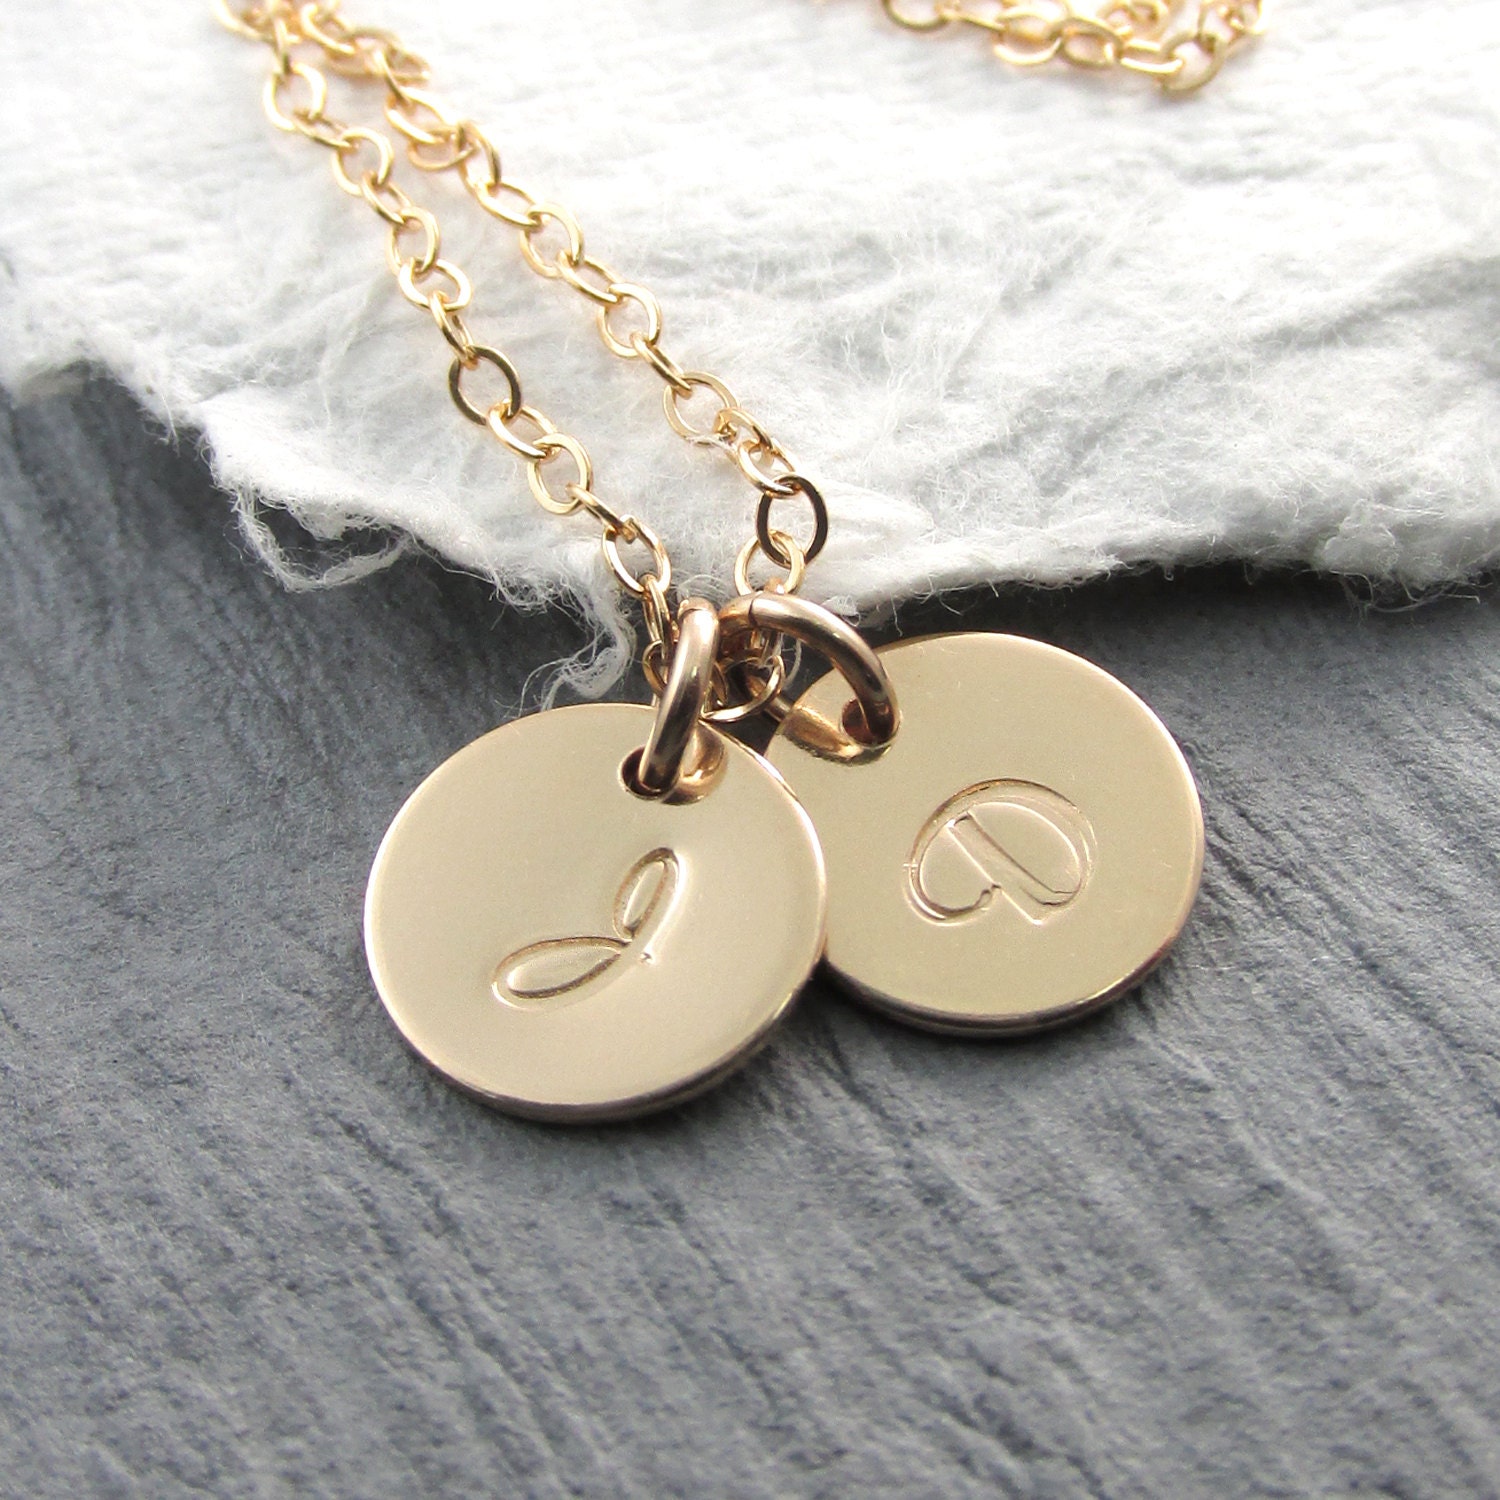 Personalized Jewelry Necklace Initial Pendants Mother Necklace